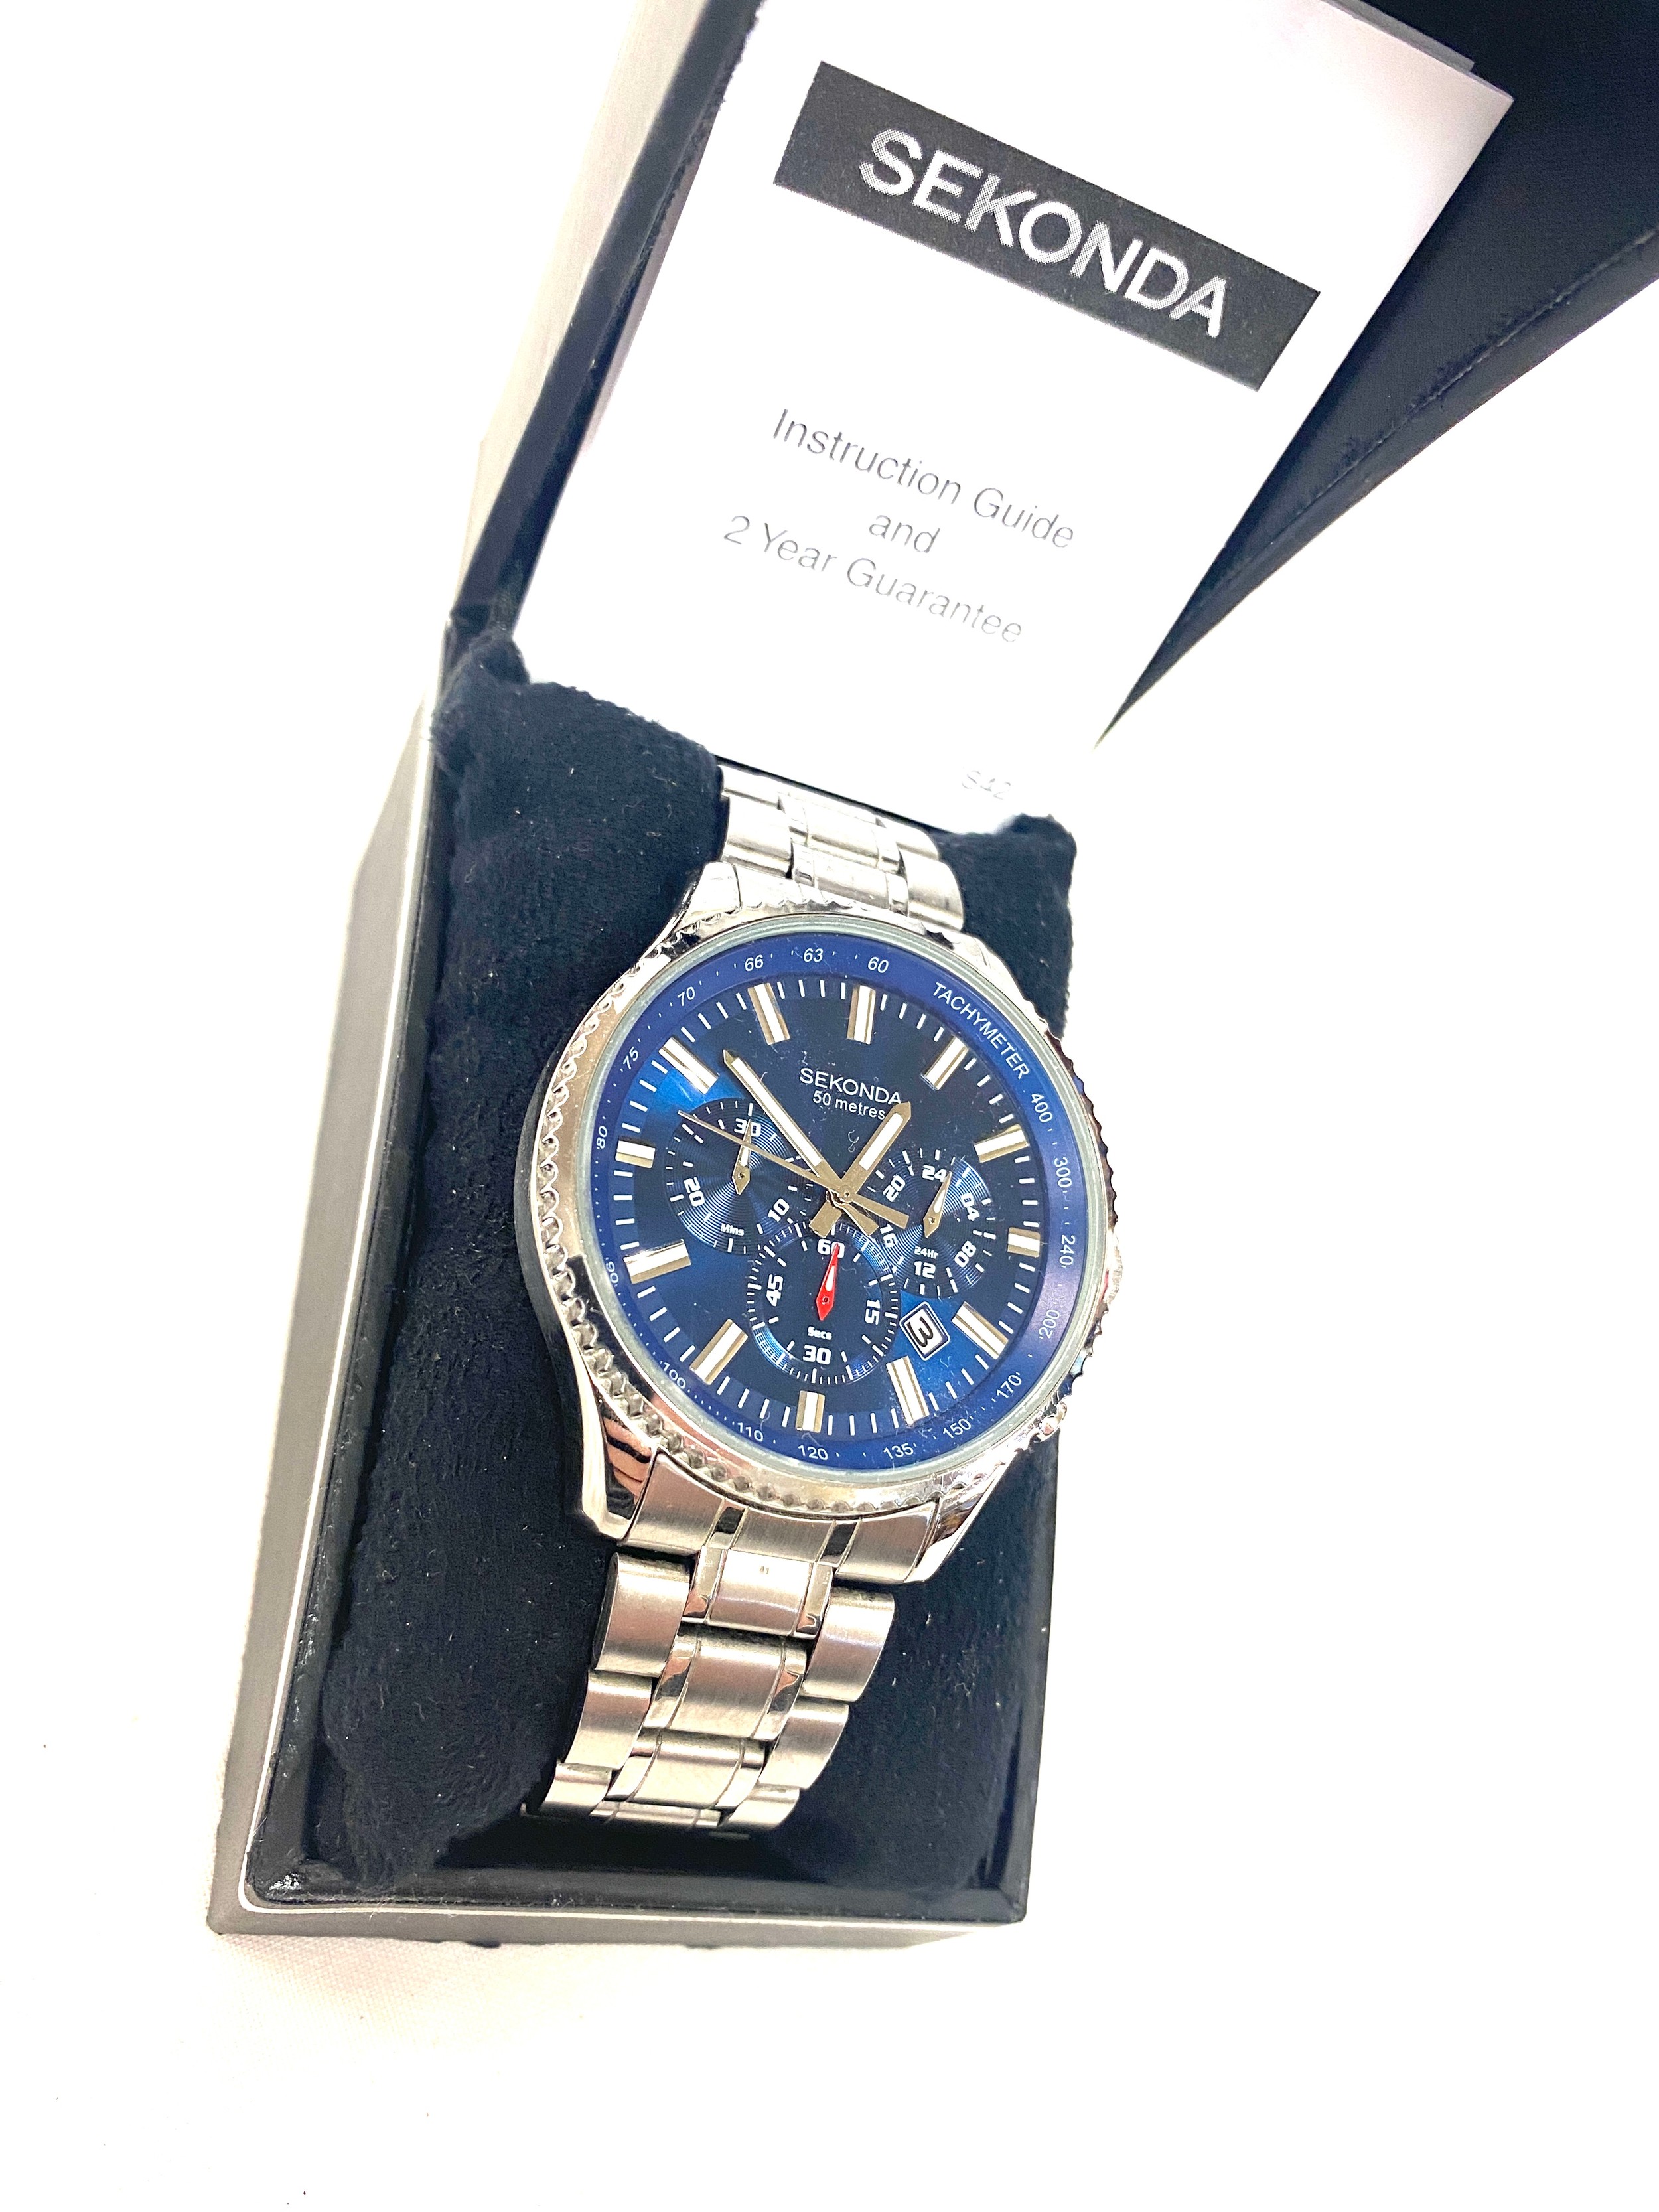 Gents cased Sekonda Tachymeter wristwatch, blue dial and metal strap - Image 3 of 4